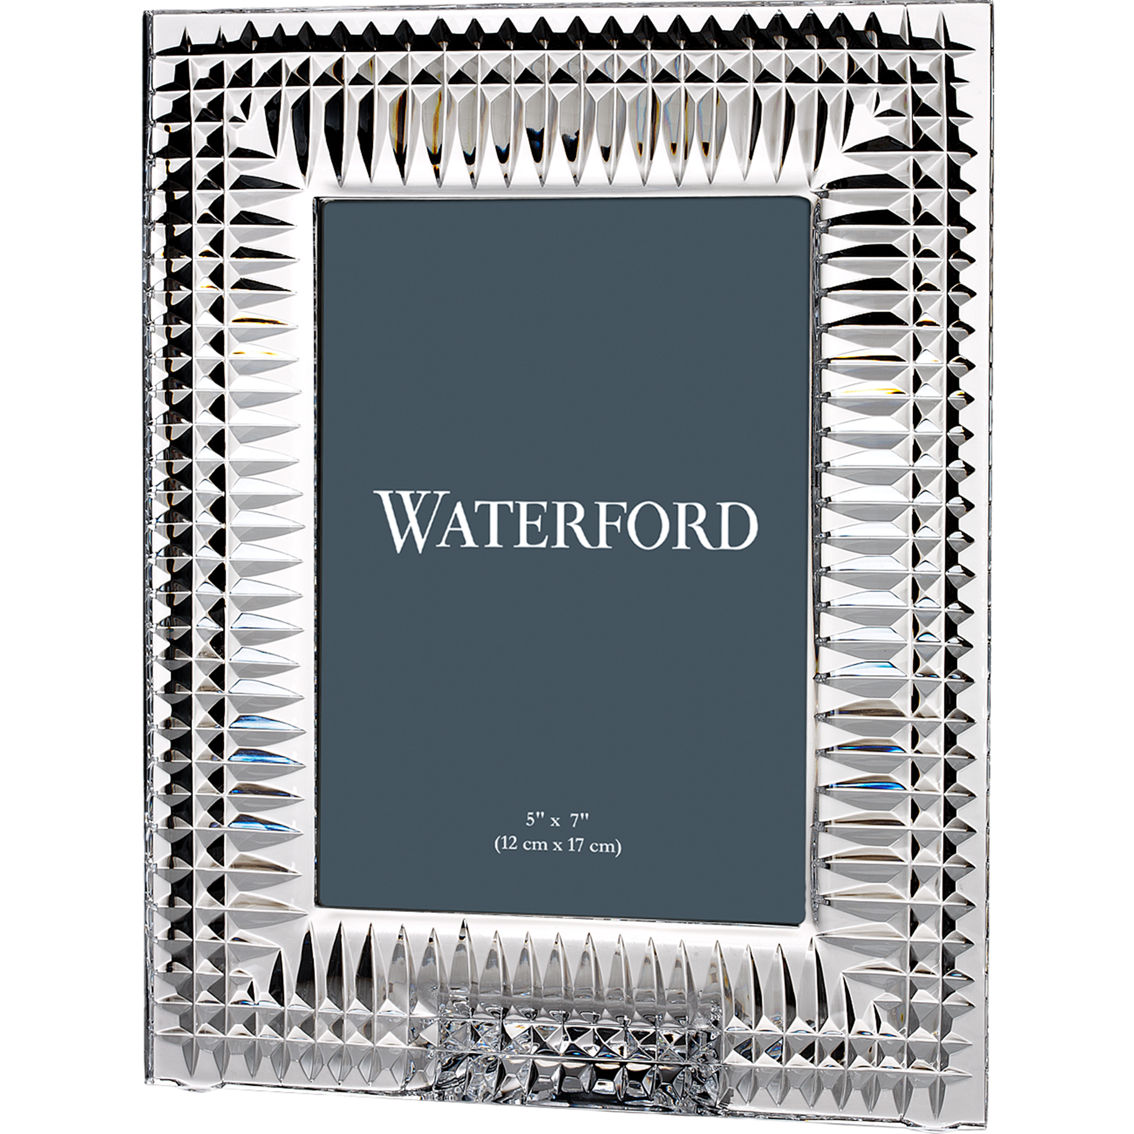 Waterford Lismore Diamond Frame 5 x 7 in.